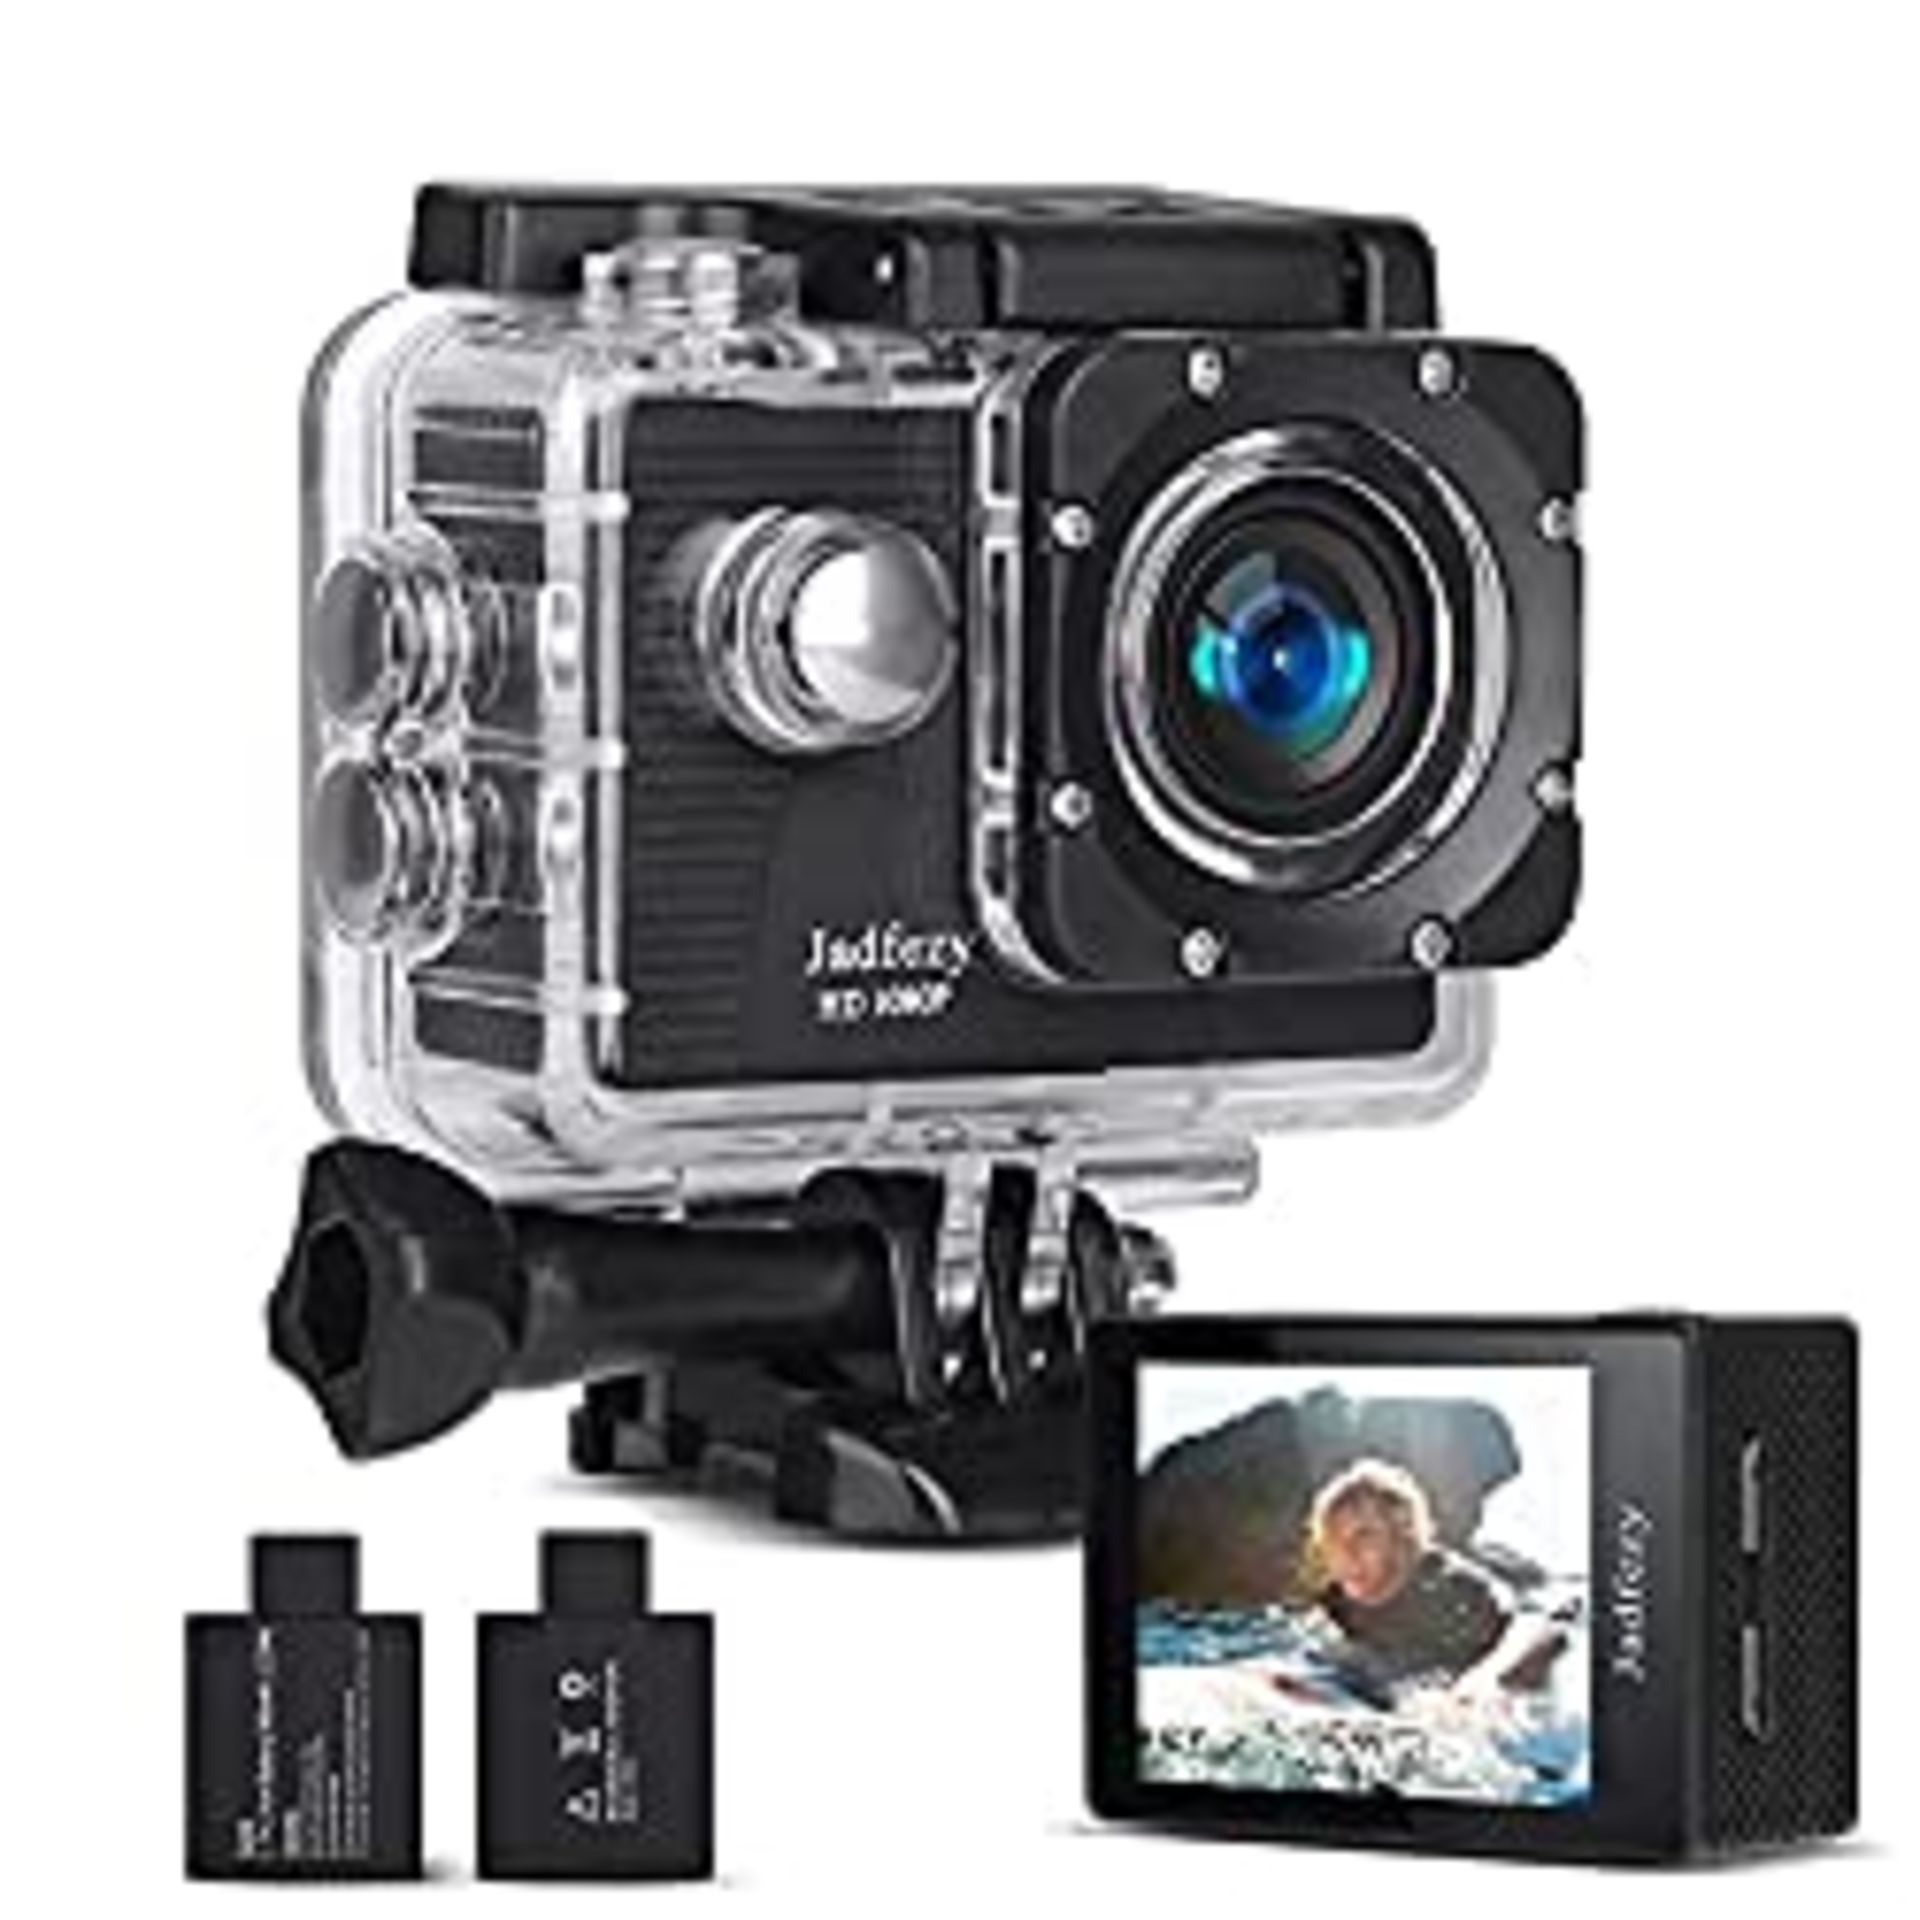 RRP £23.39 Jadfezy Action Camera FHD 1080P 12MP